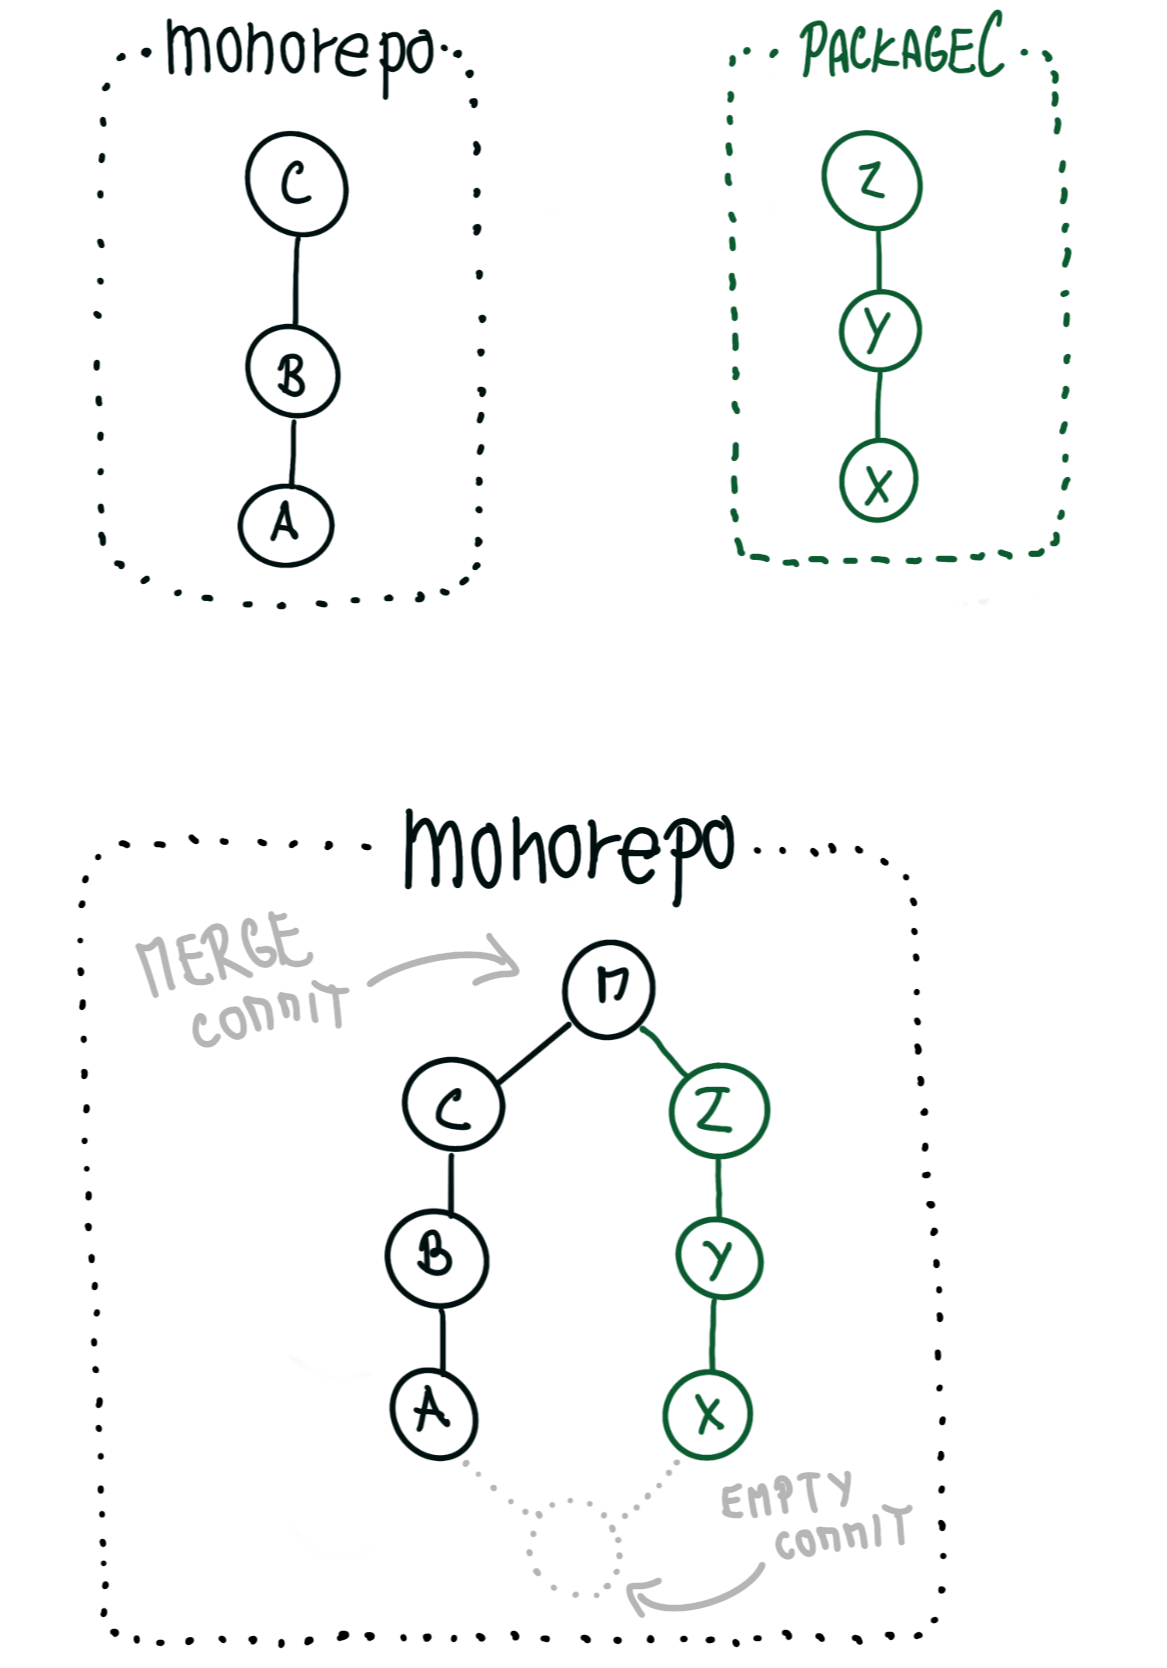 Git history before and after merge